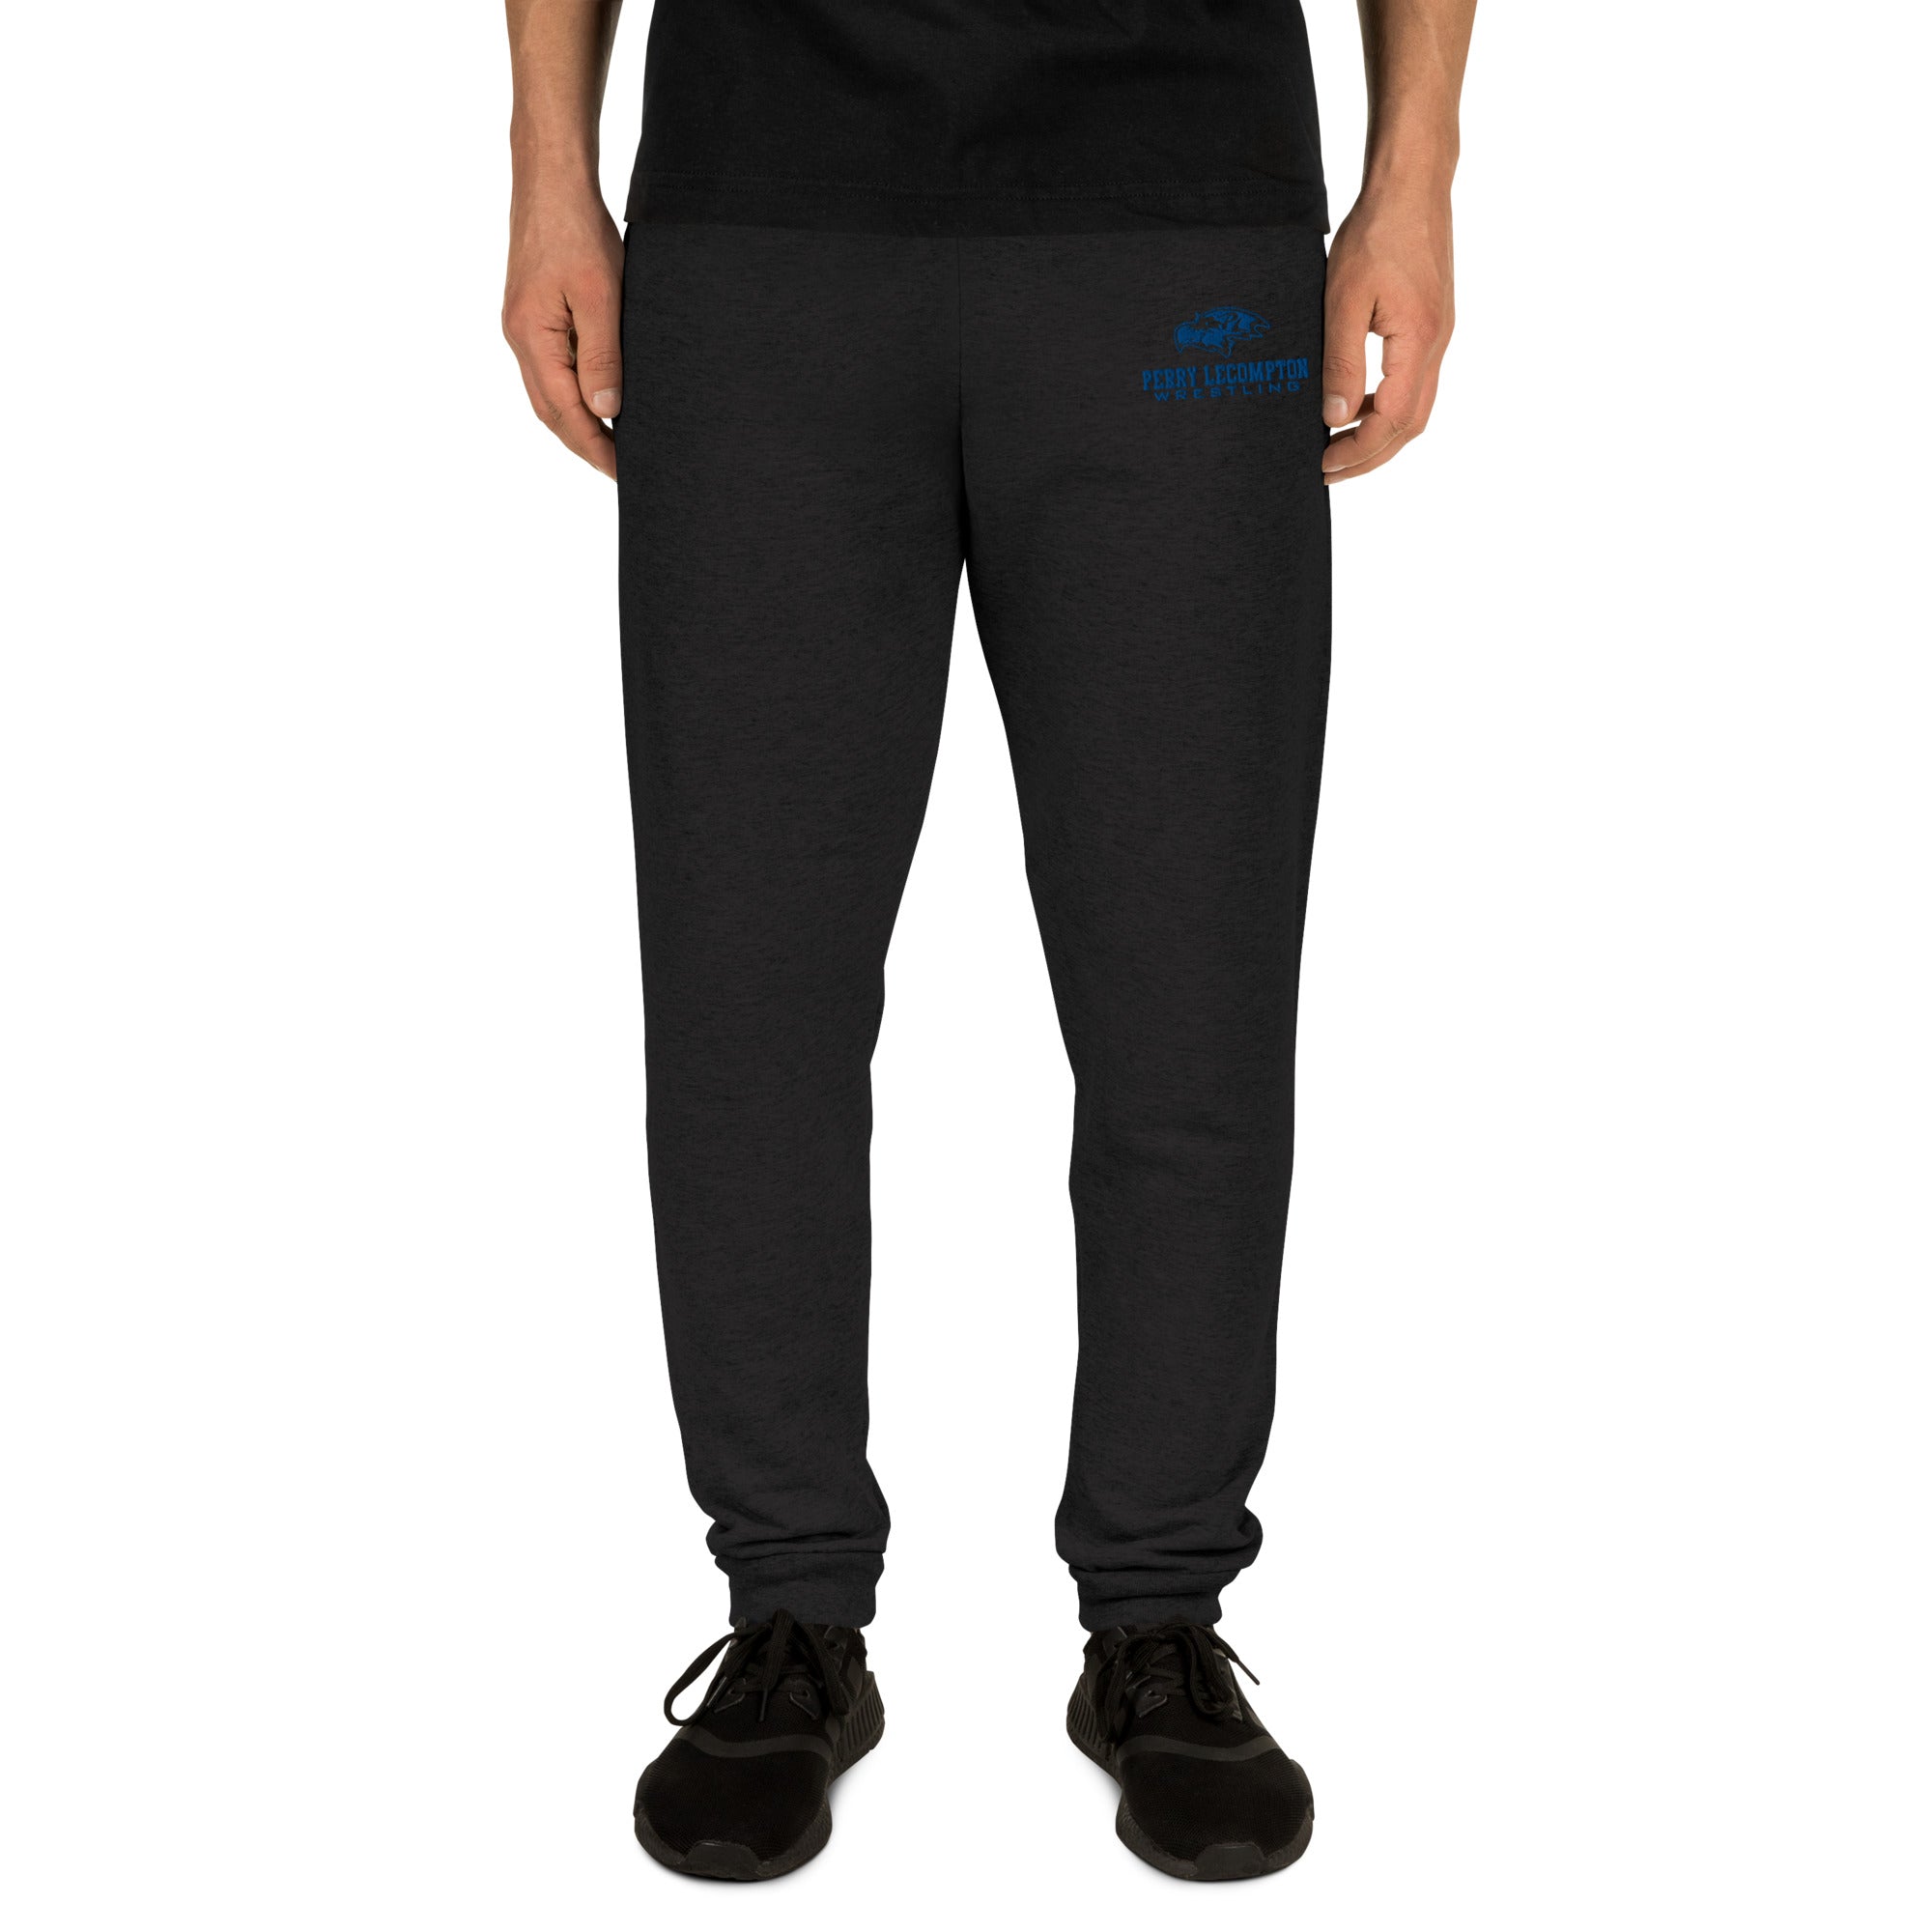 Perry Lecompton Unisex Joggers